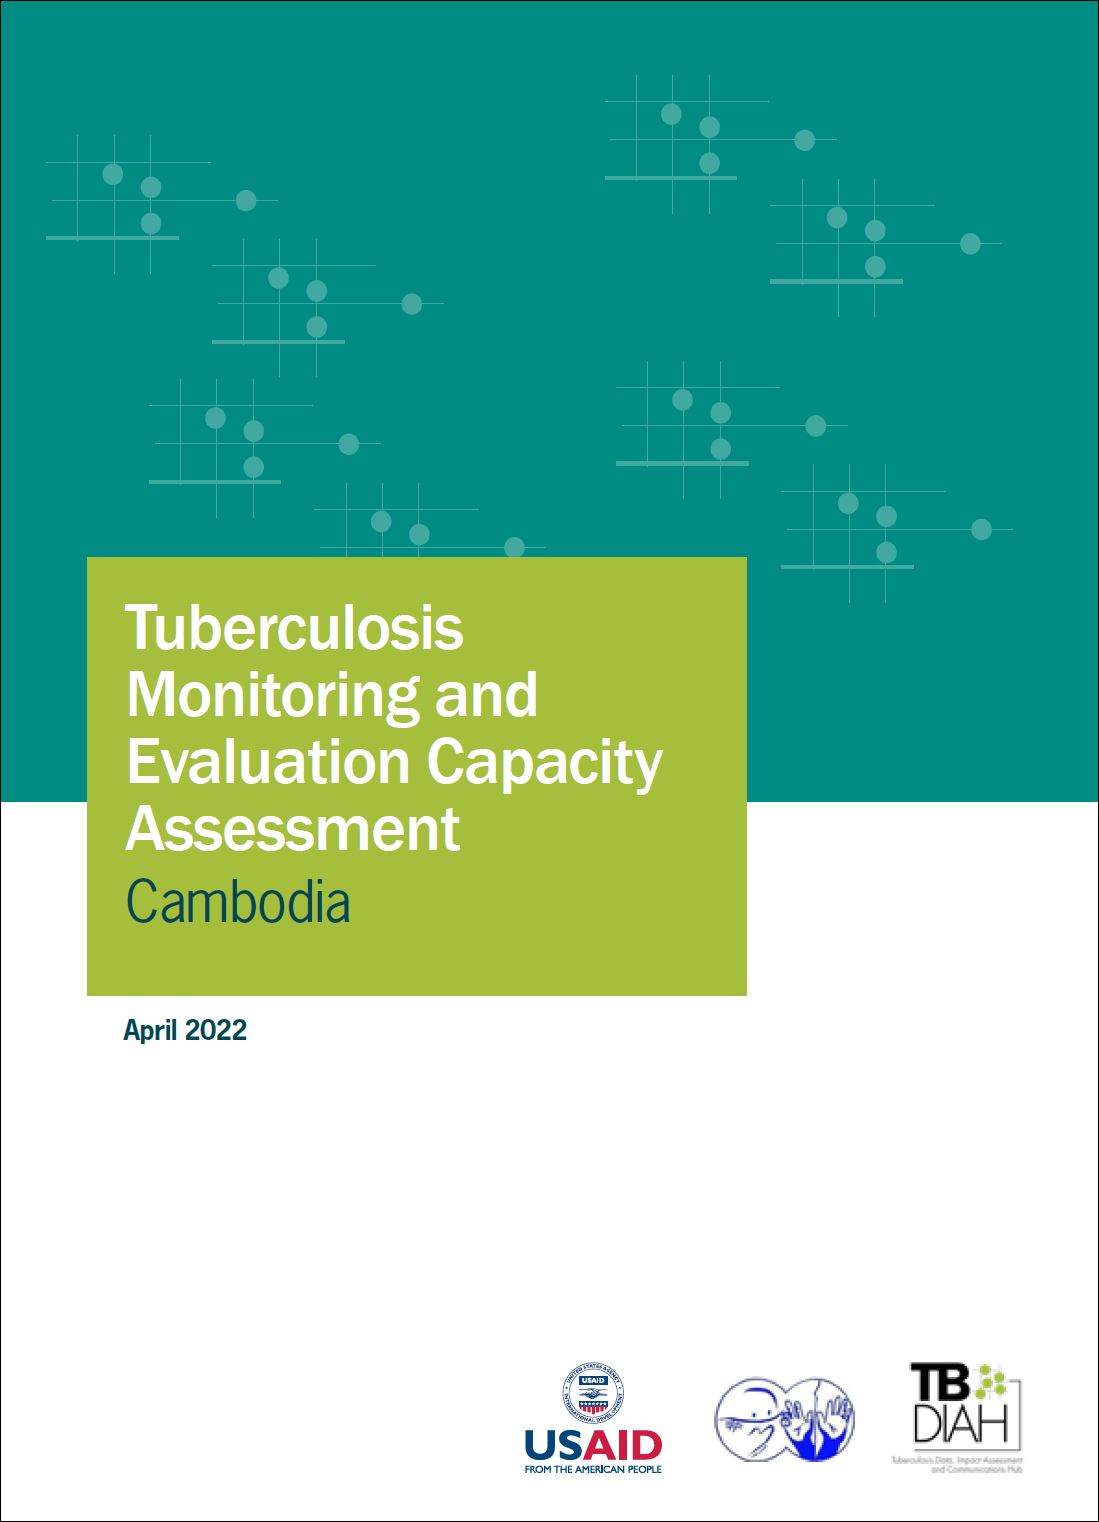 Tuberculosis Monitoring and Evaluation Capacity Assessment: Cambodia